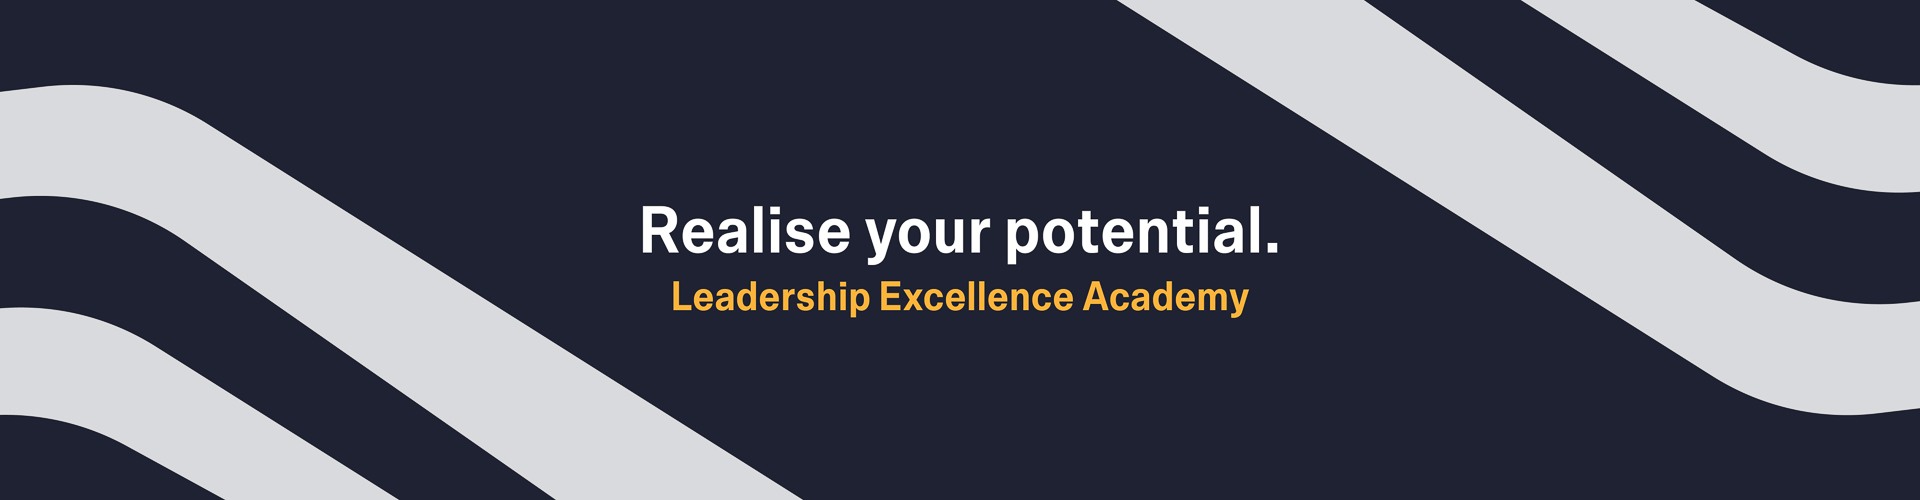 "Realise your potential, Leadership Excellence Academy"